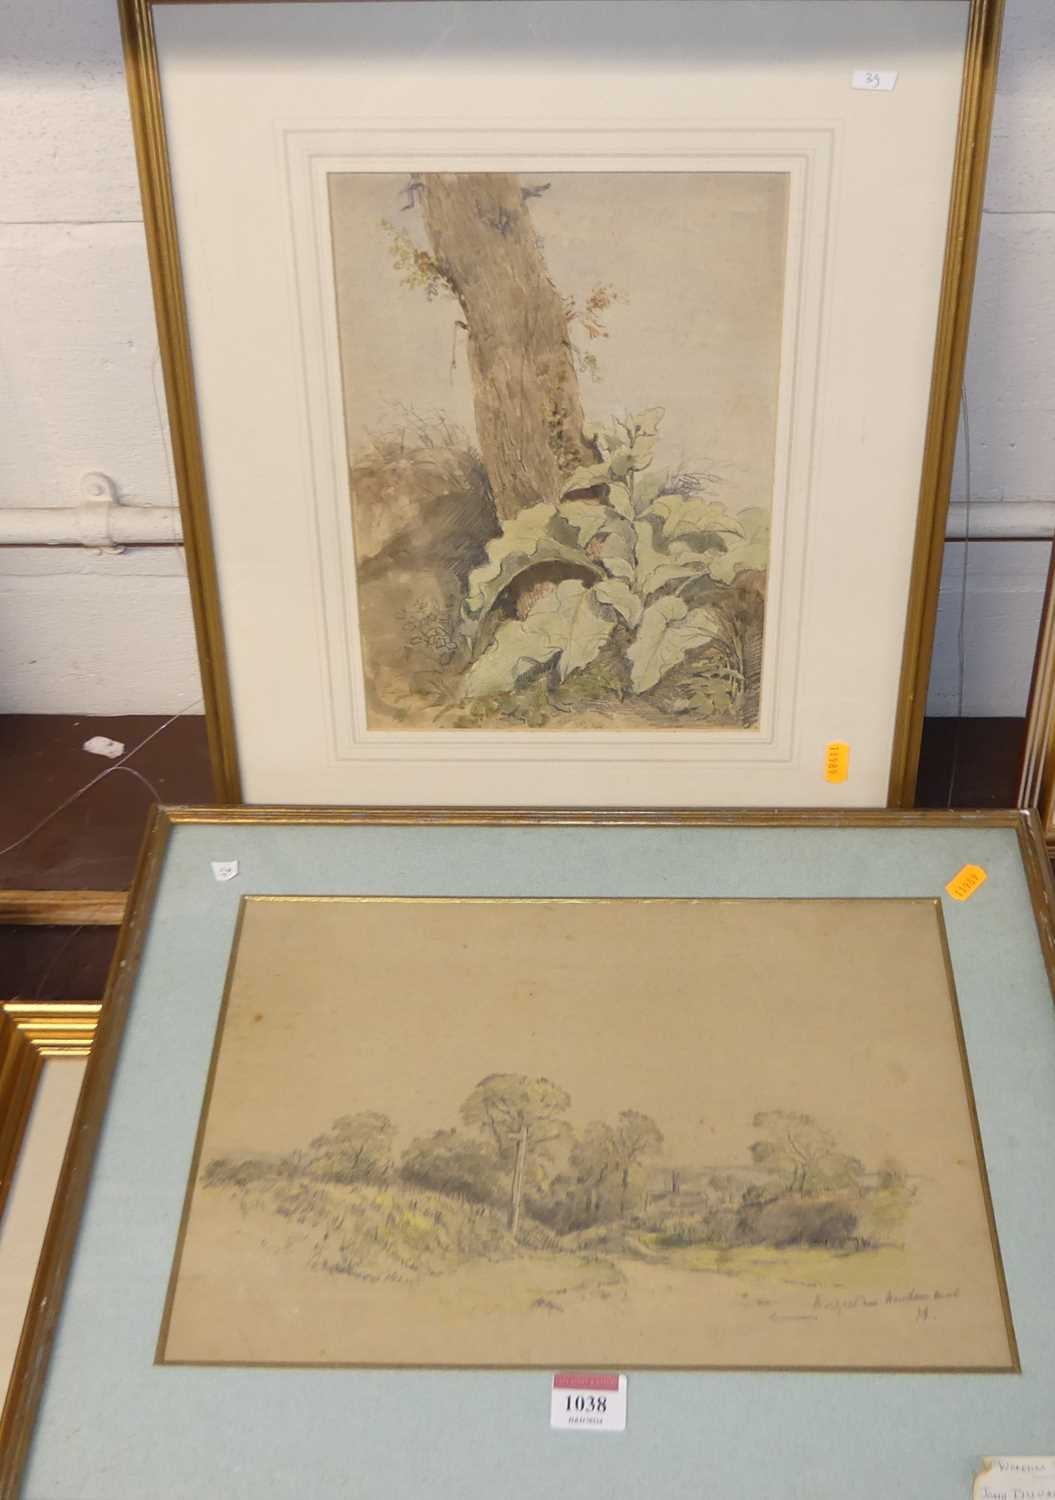 John Duvall (1816-1892) - Landscape scene, pencil and green chalks, indistinctly titled lower